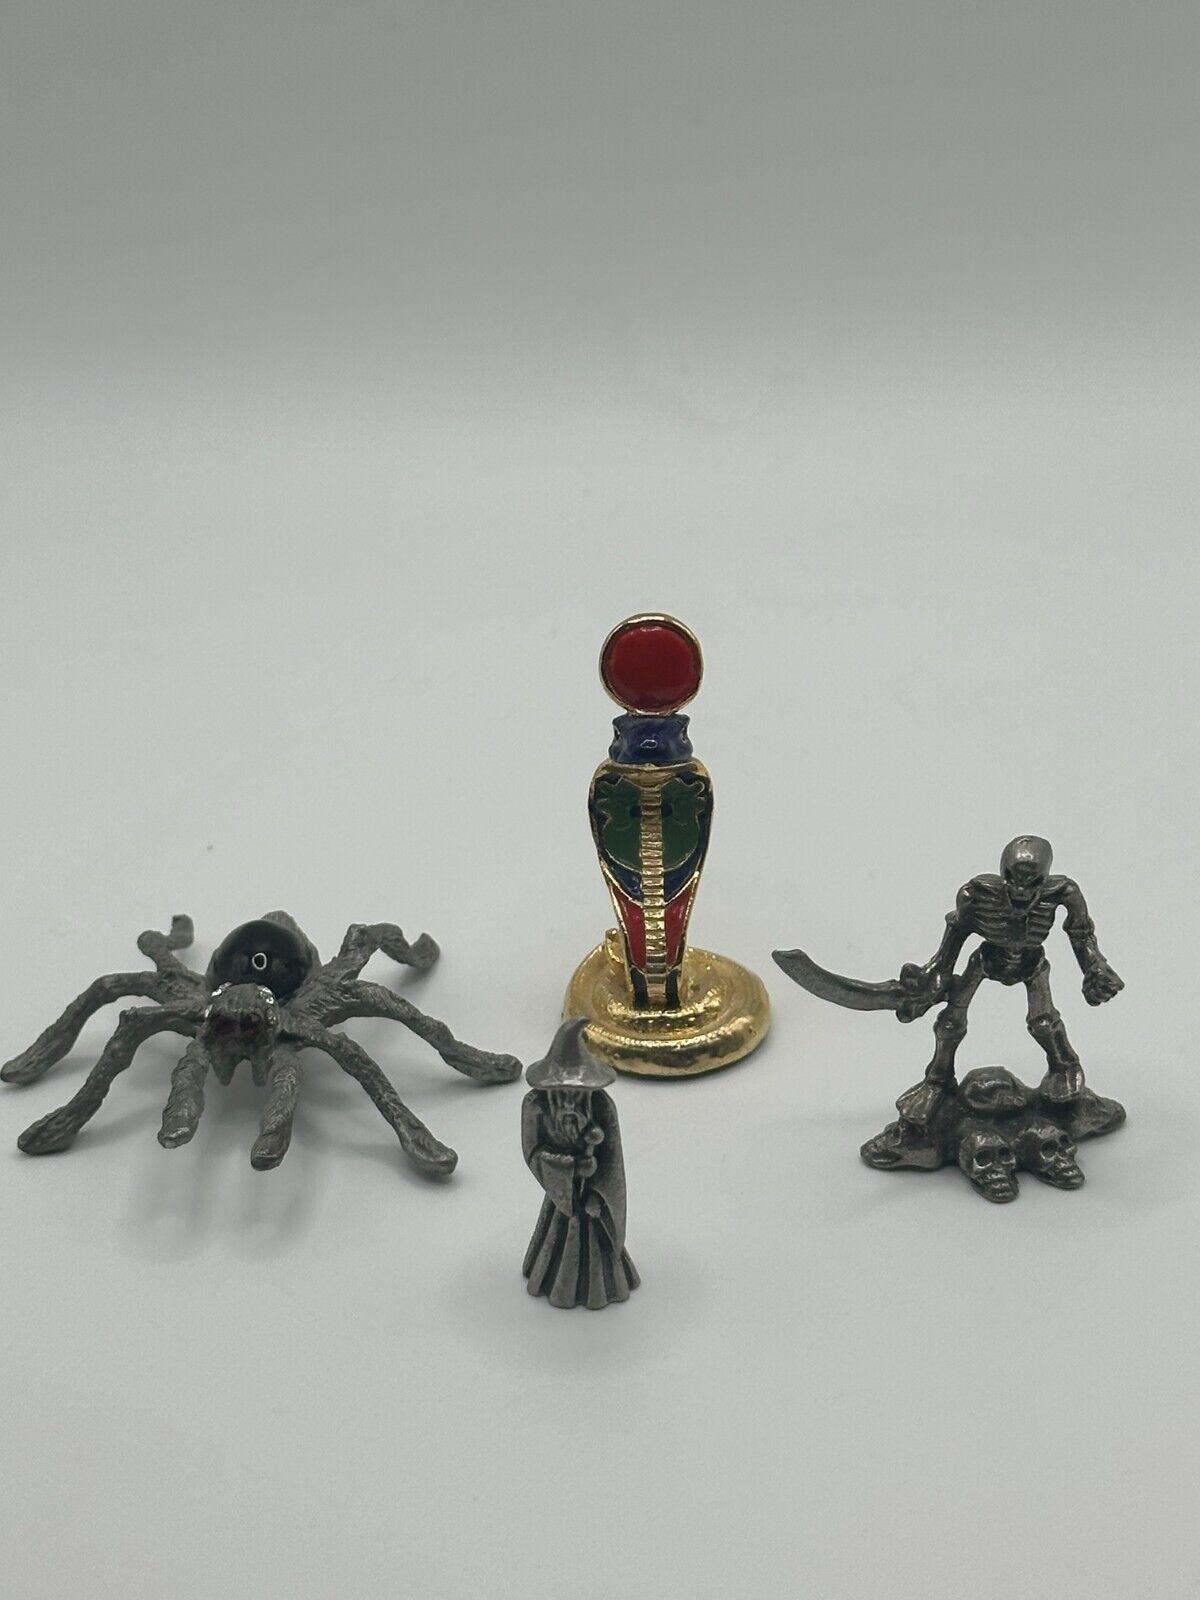 Pewter Fantasy Figures Lot - 4 in Total - Statues - Collectibles - Wizard